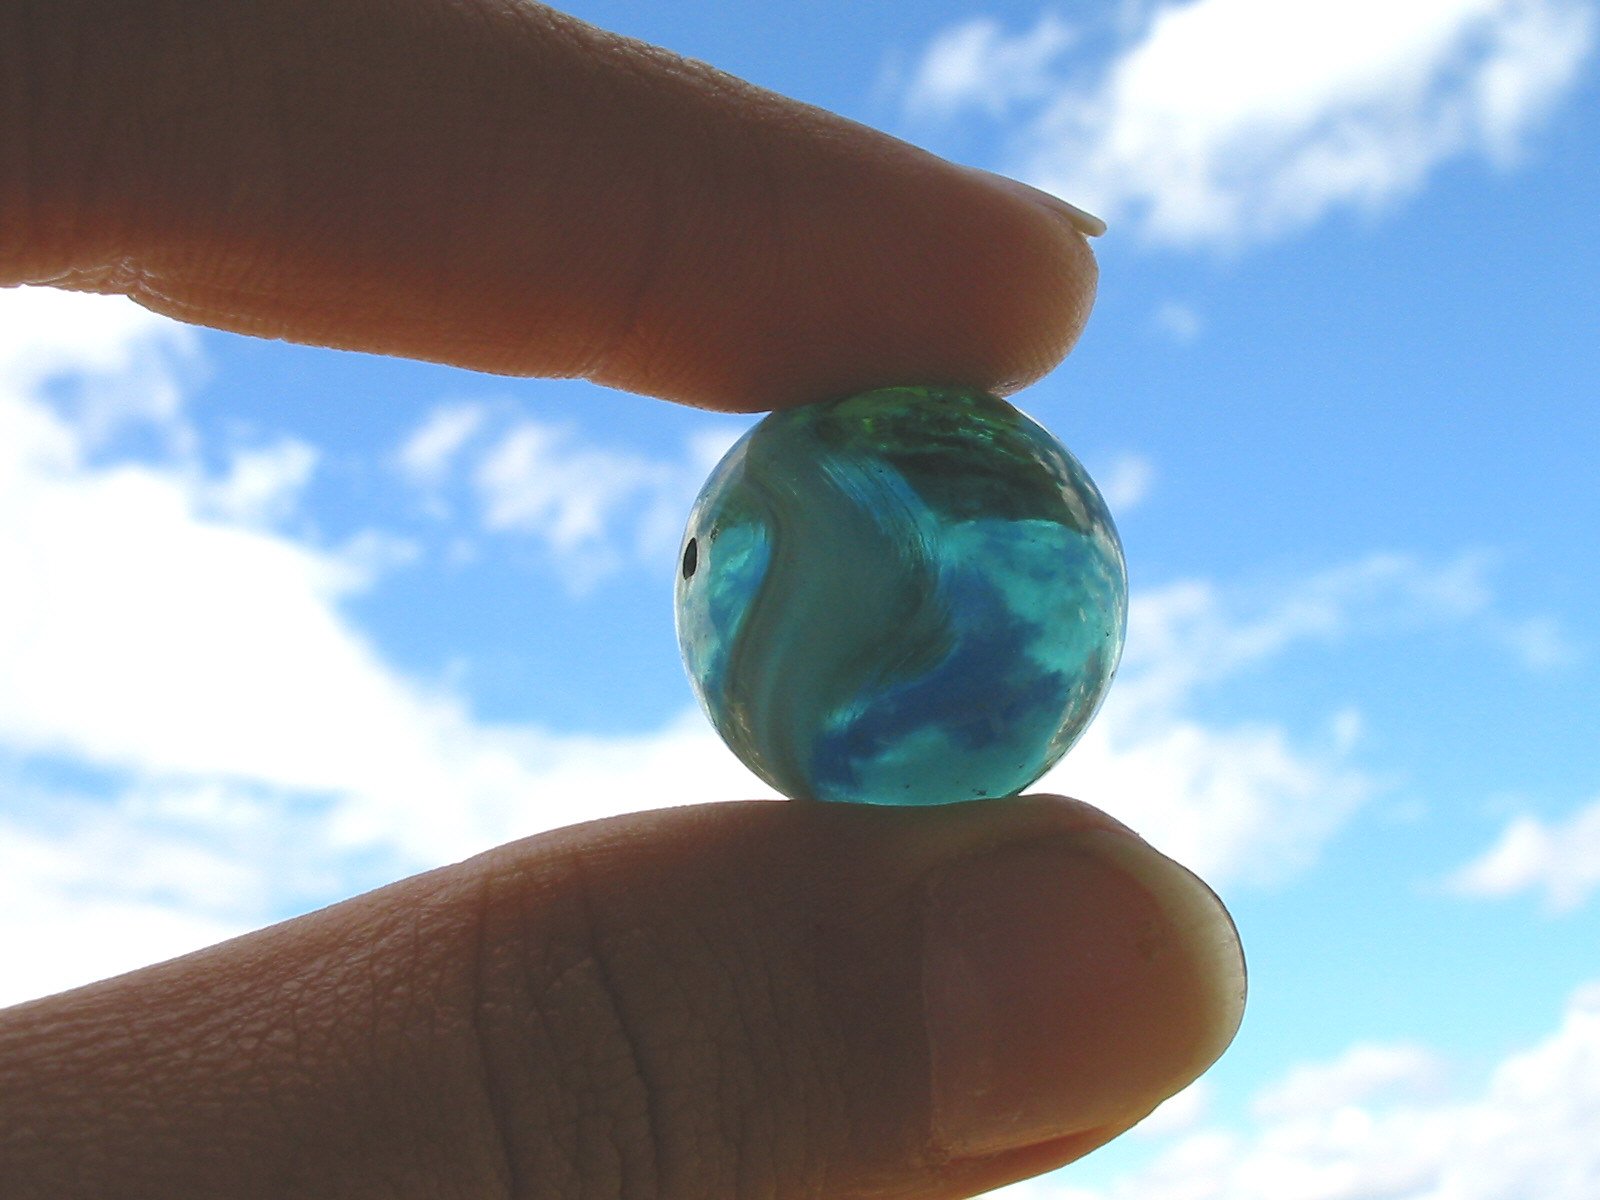 a person's hand holding a glass ball shaped object